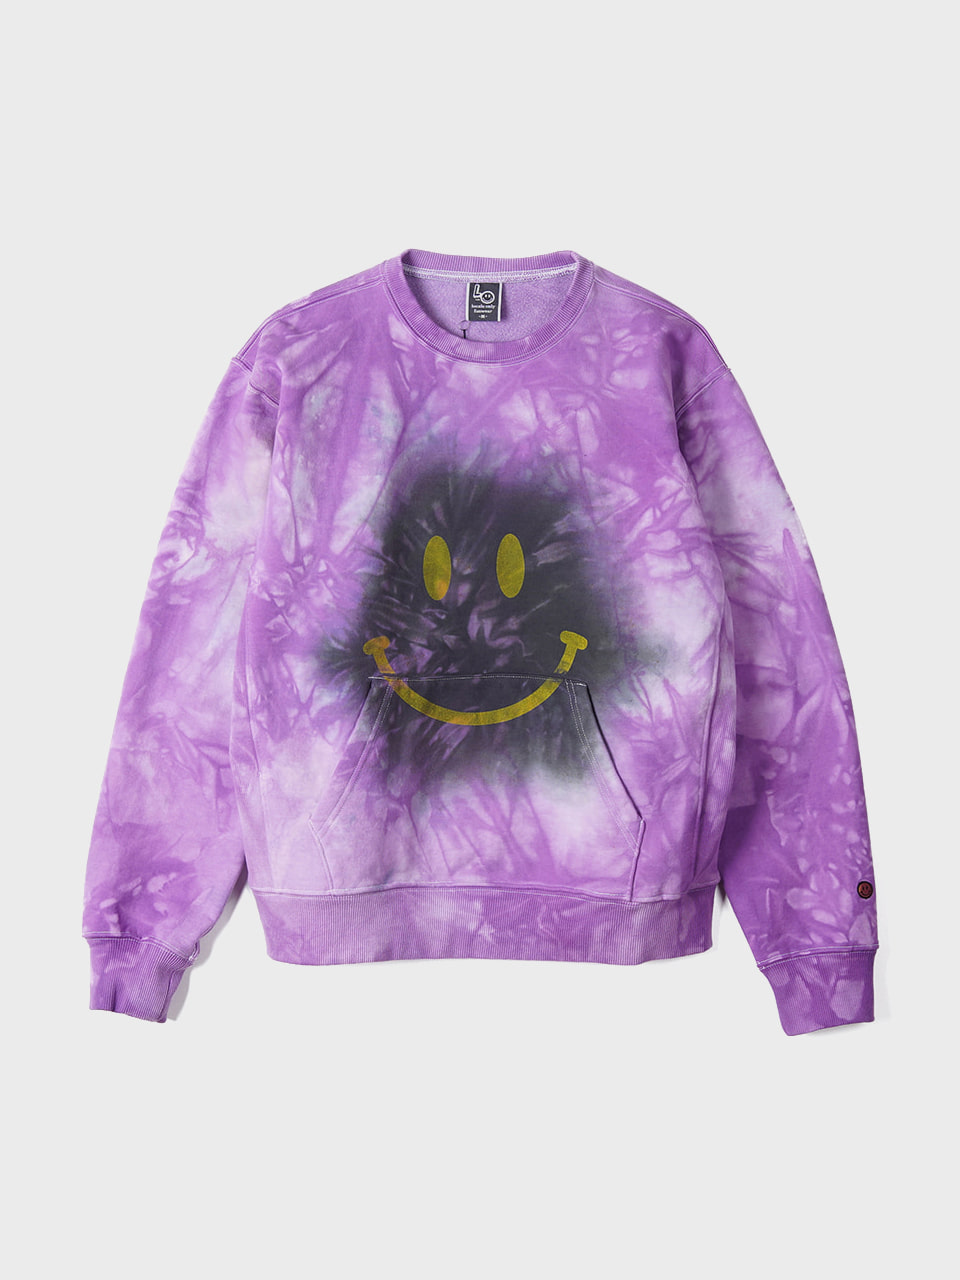 LOCALS ONLY Tie dye MAD Smile Sweat Shirts &quot;Purple/Black&quot;